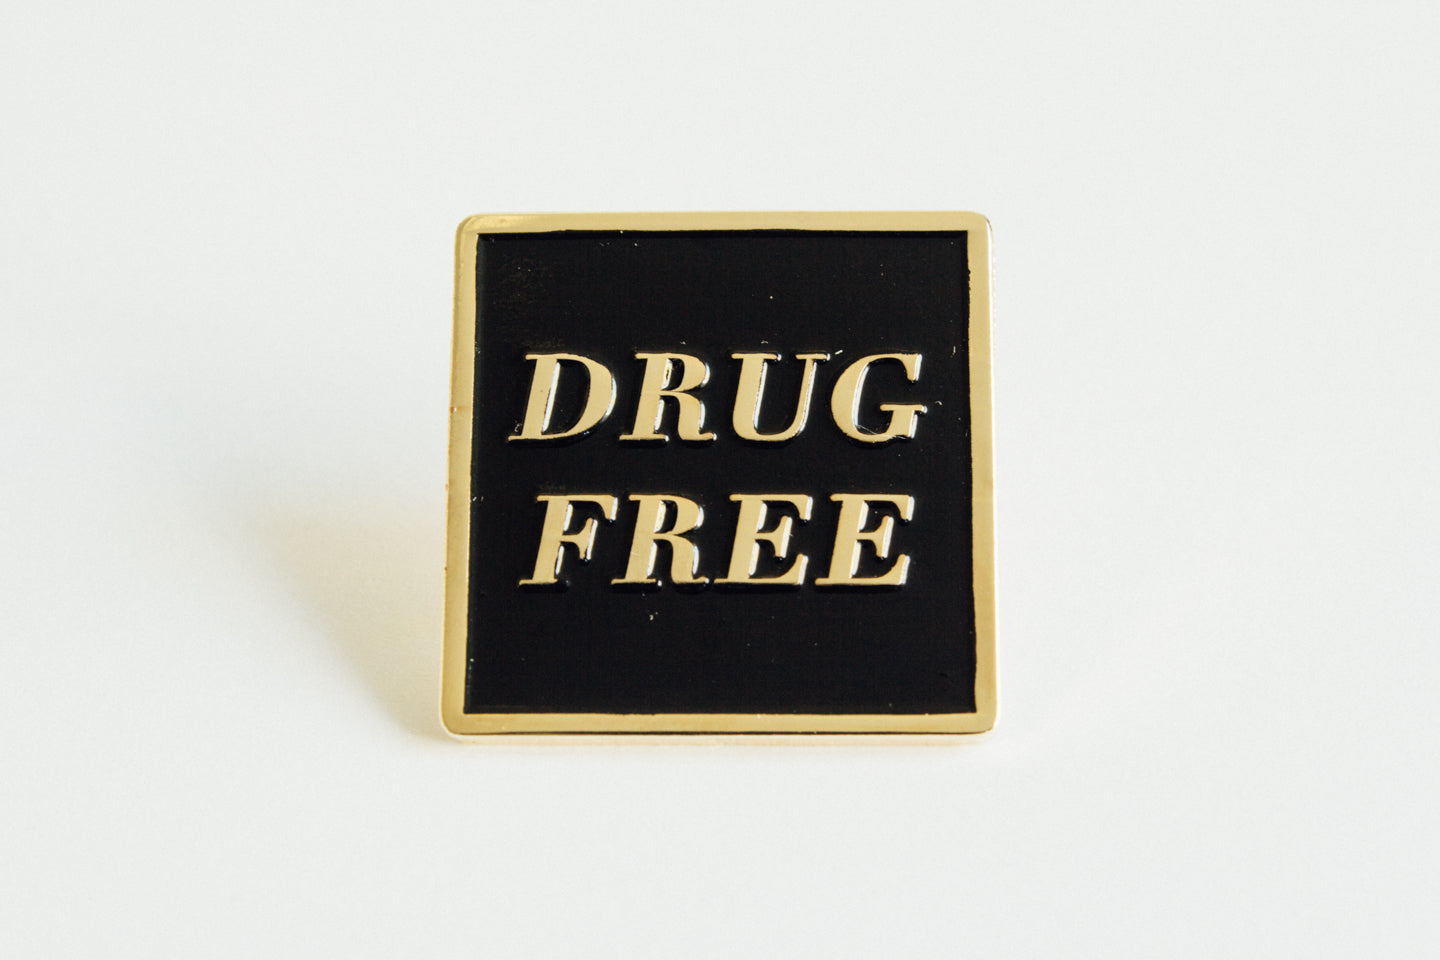 Drug Free Square Straight Edge Lapel Pin in black and gold by STRAIGHTEDGEWORLDWIDE